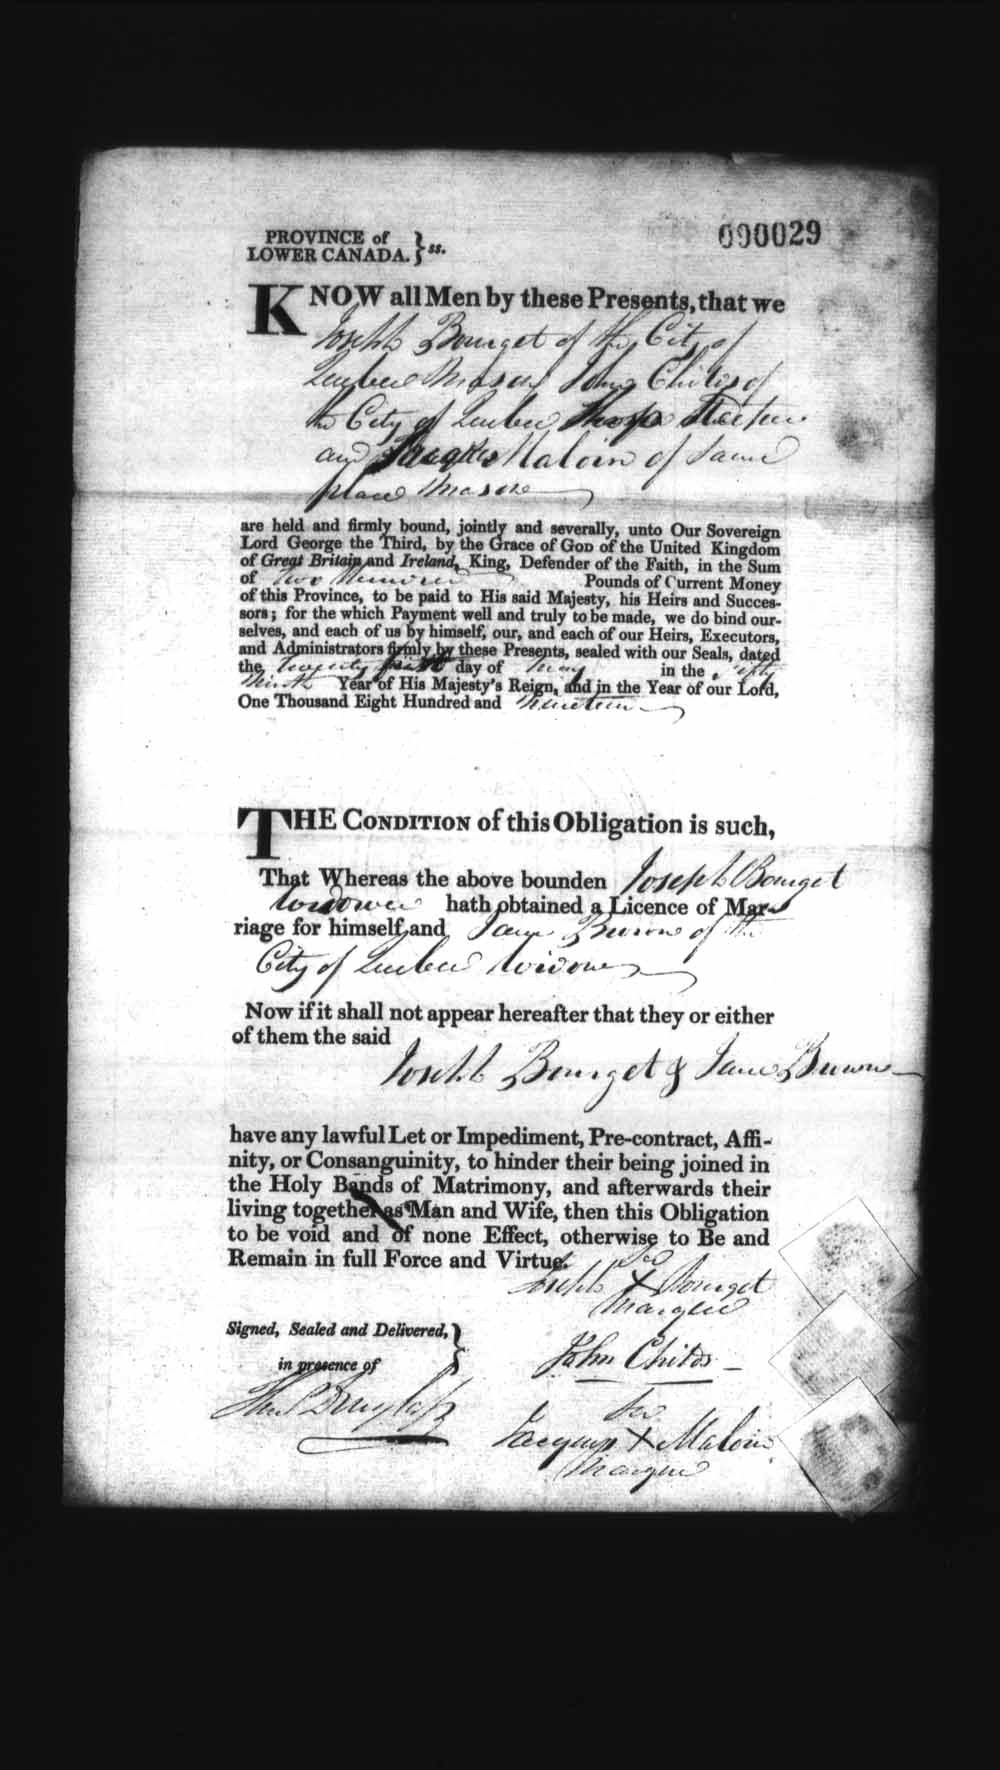 Digitized page of Upper and Lower Canada Marriage Bonds (1779-1865) for Image No.: e008235841